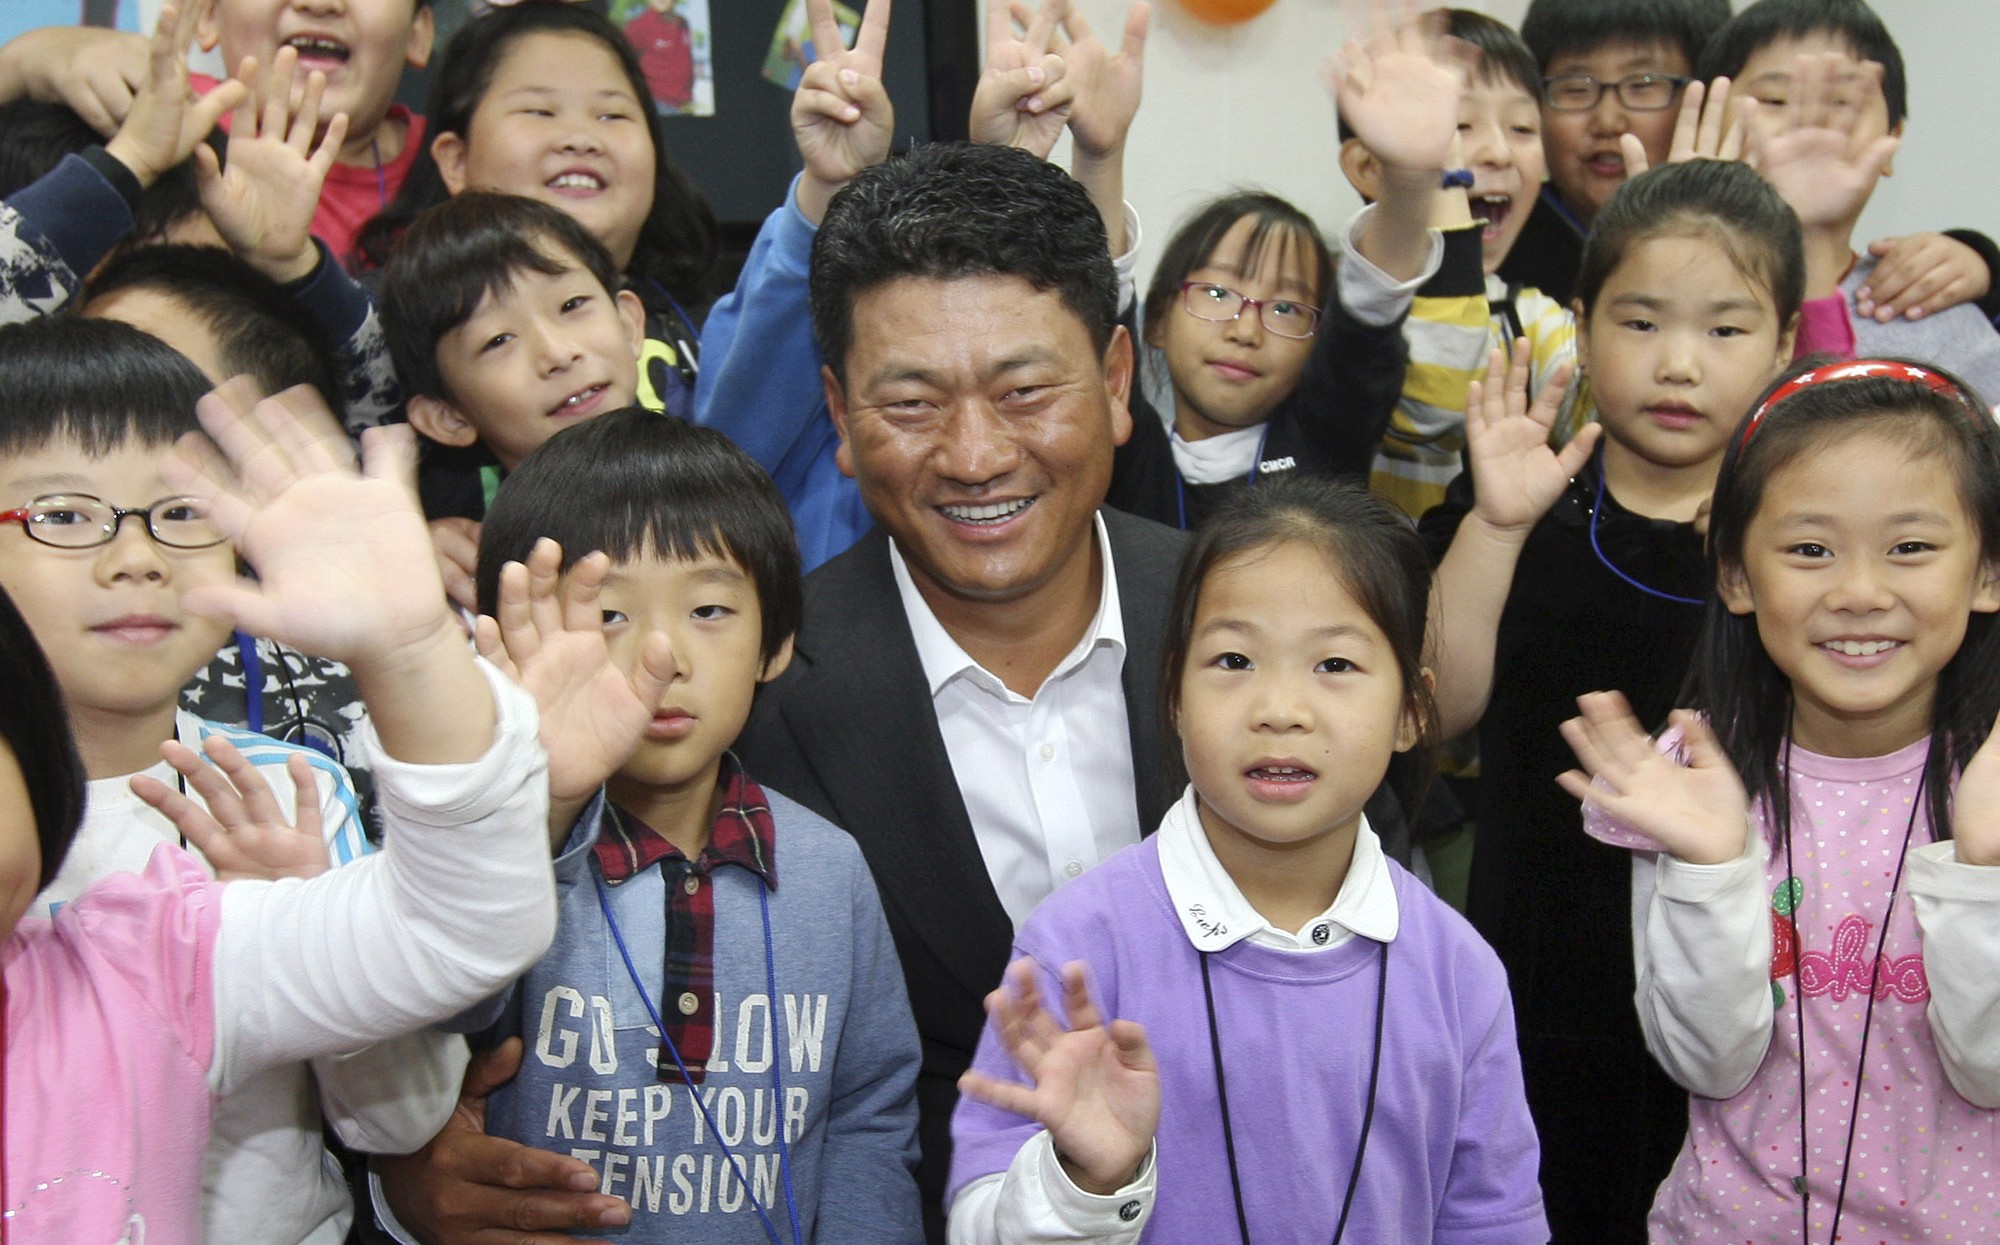 The KJ Choi Foundation (www.kjchoifoundation.org)  supports the hopes and dreams of youth around the world. (Newsis)